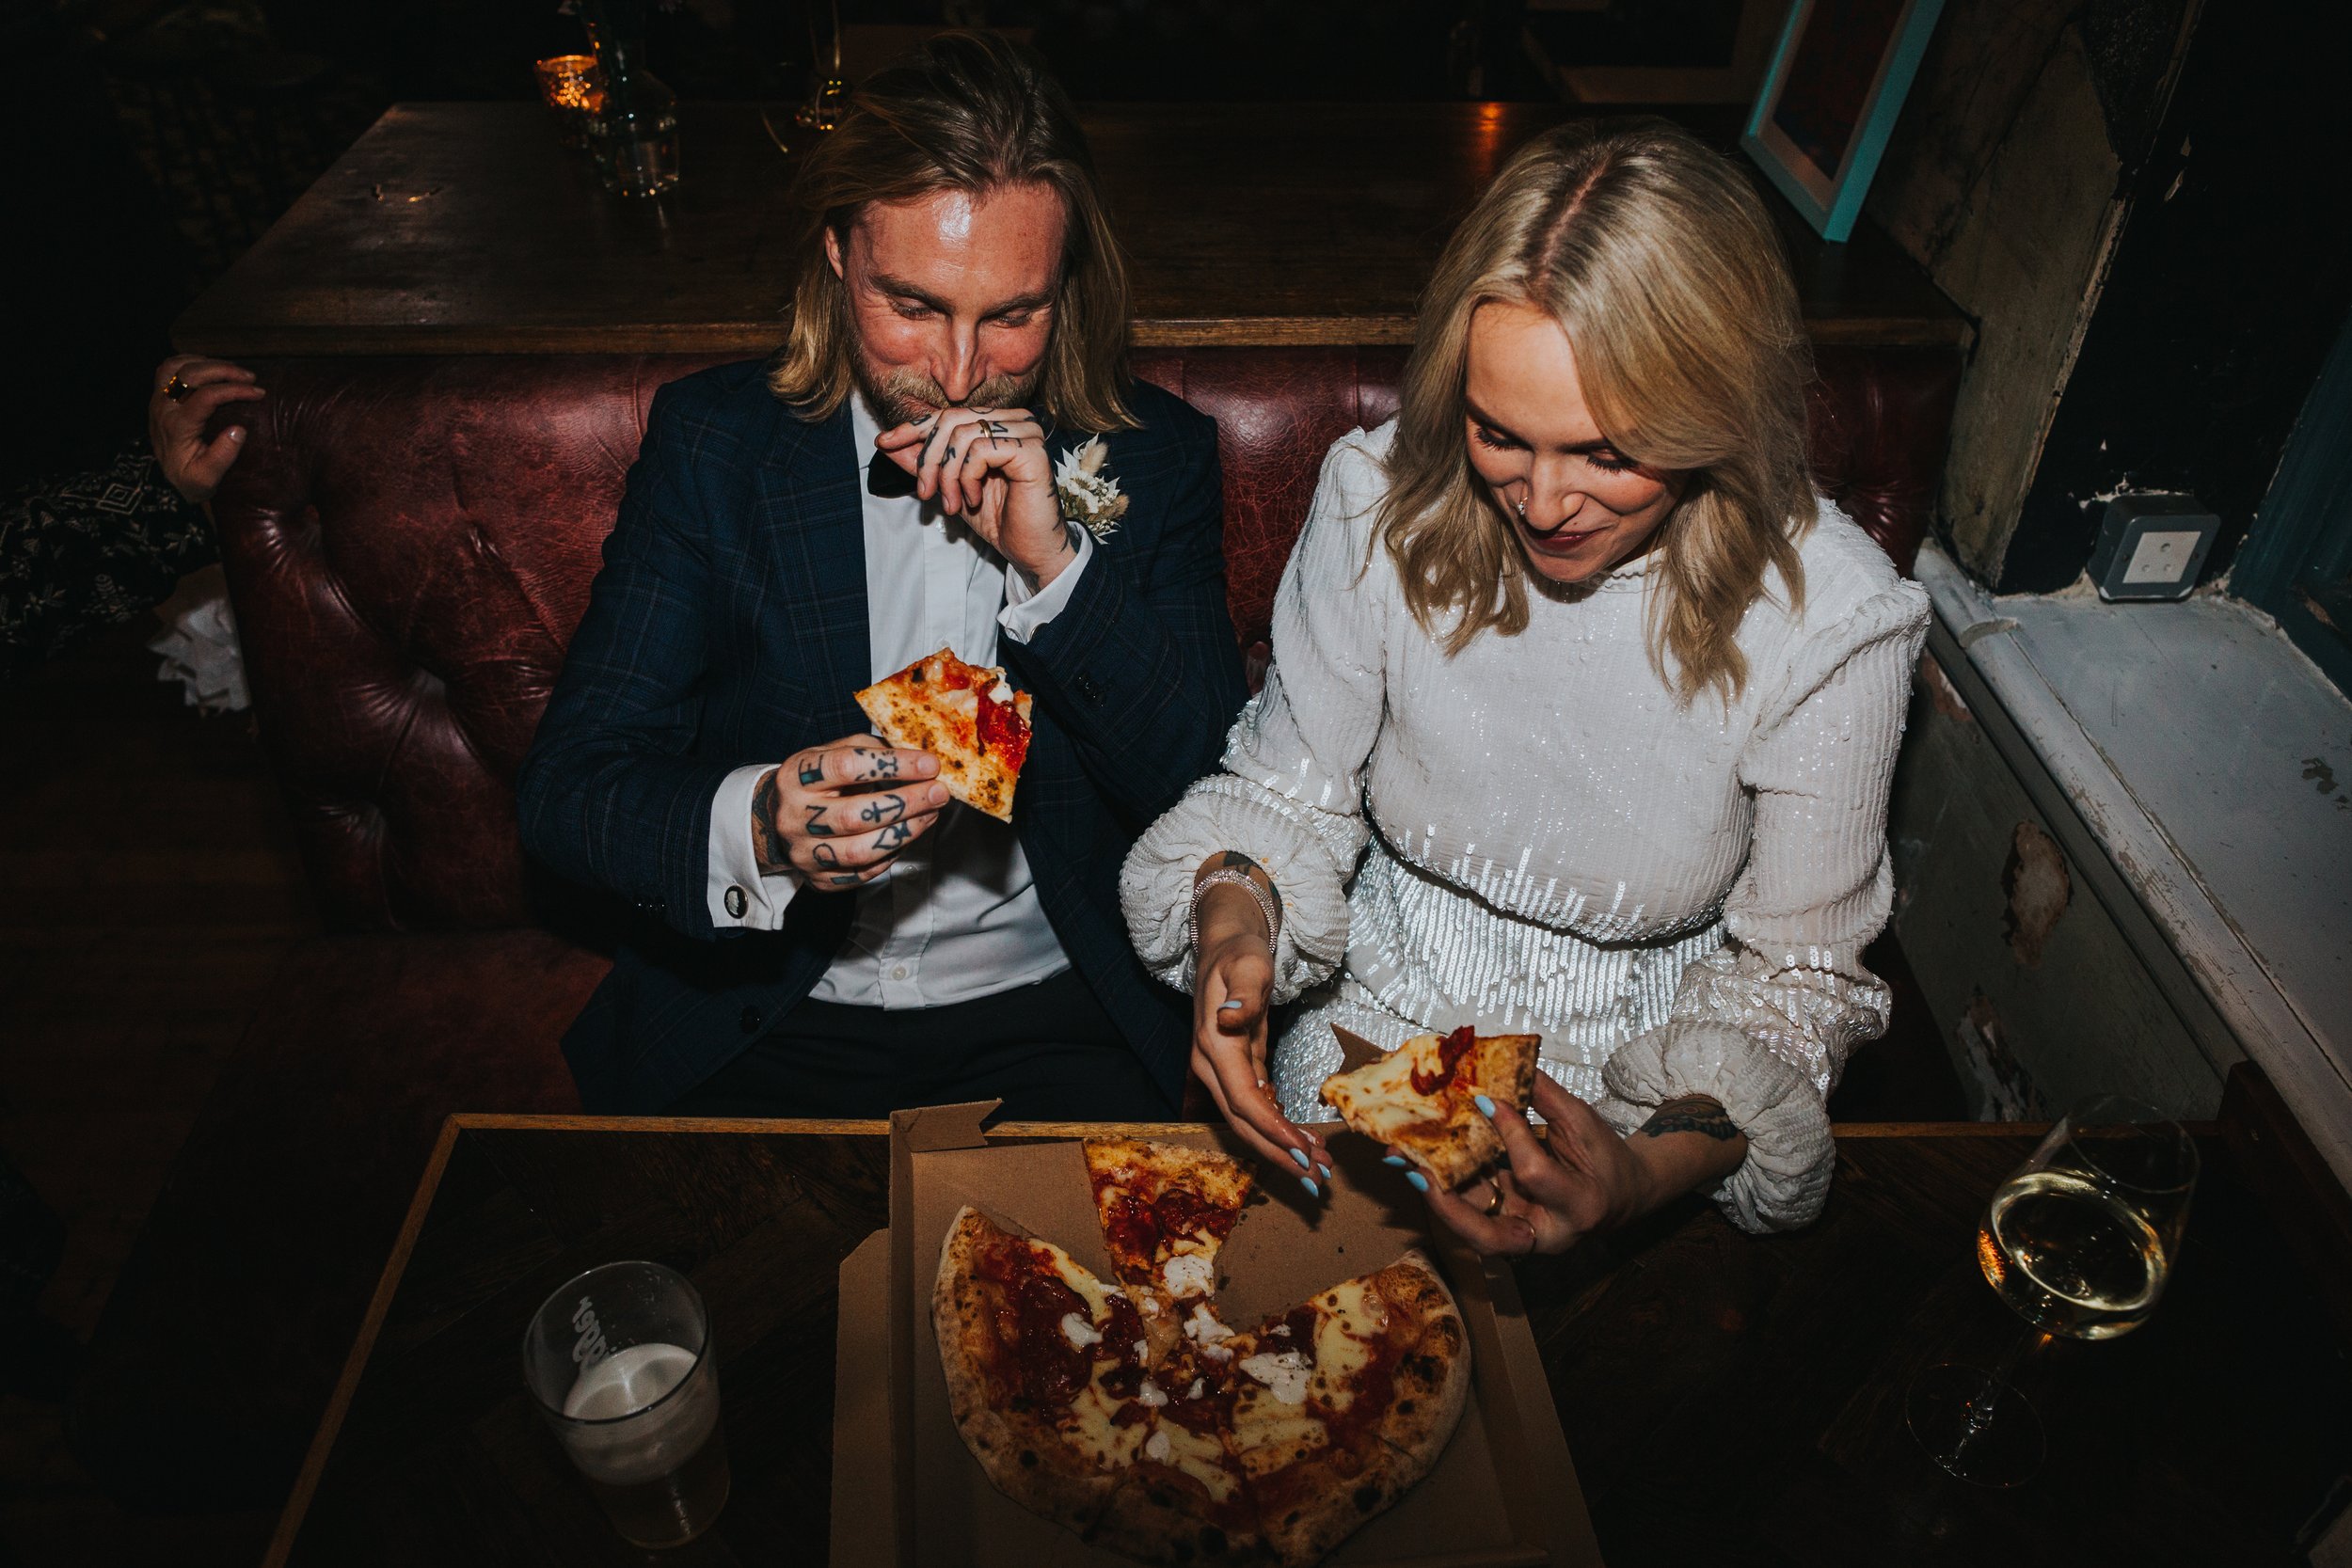 Couple eating pizza and laughing shot from above. 